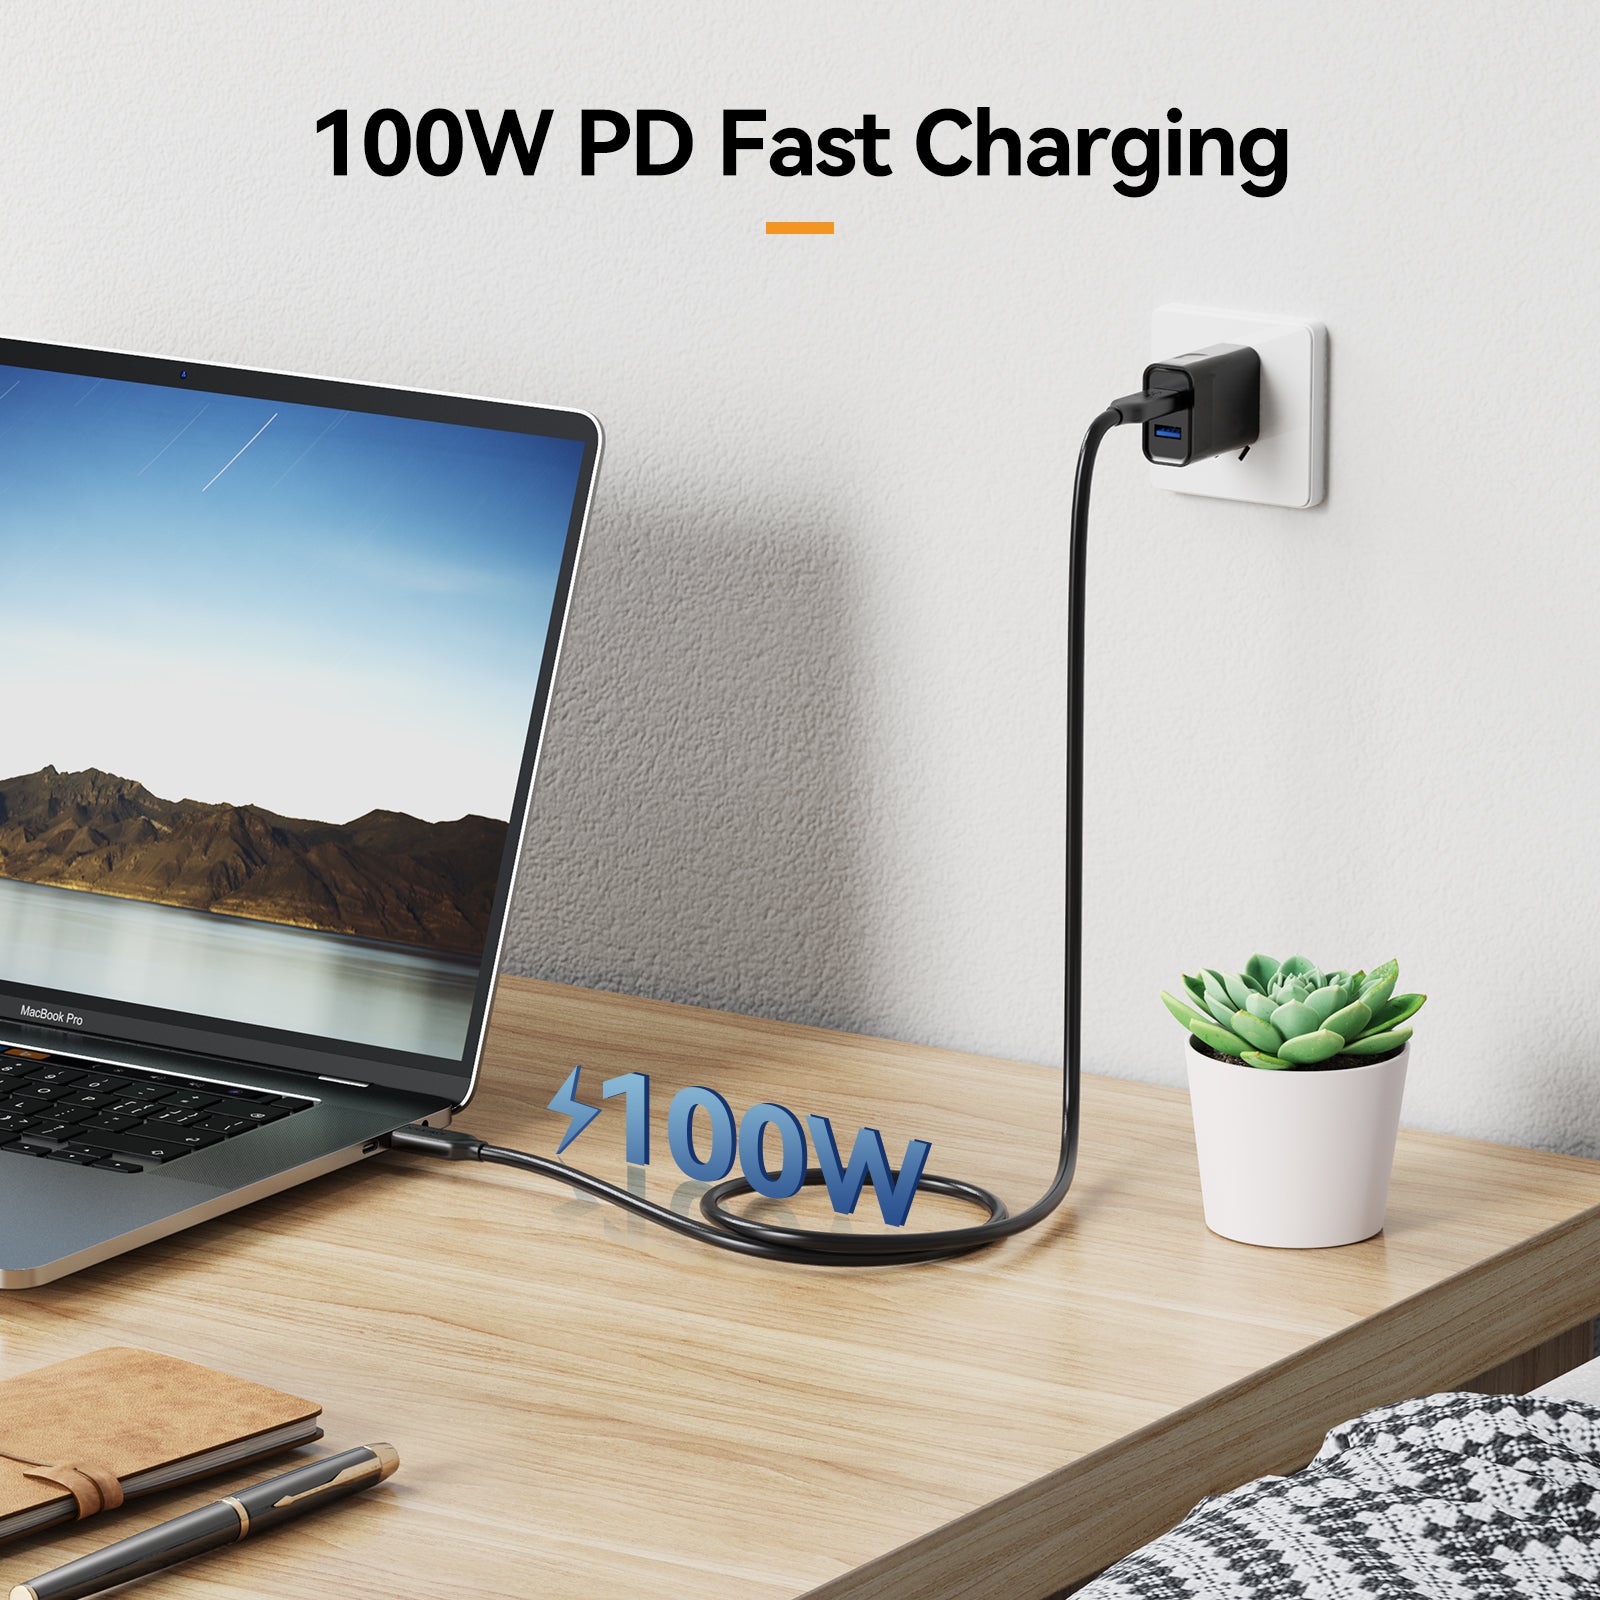 USB4 Cable 40Gbps, iDsonix Thunderbolt 4/Thunderbolt 3 Cable, USB 4.0 Cable Support HD Video 8K@60Hz/Dual 4K@60Hz, 100W Charging Compatible with External SSD, eGpu,USB-C Docking Station,MacBook etc